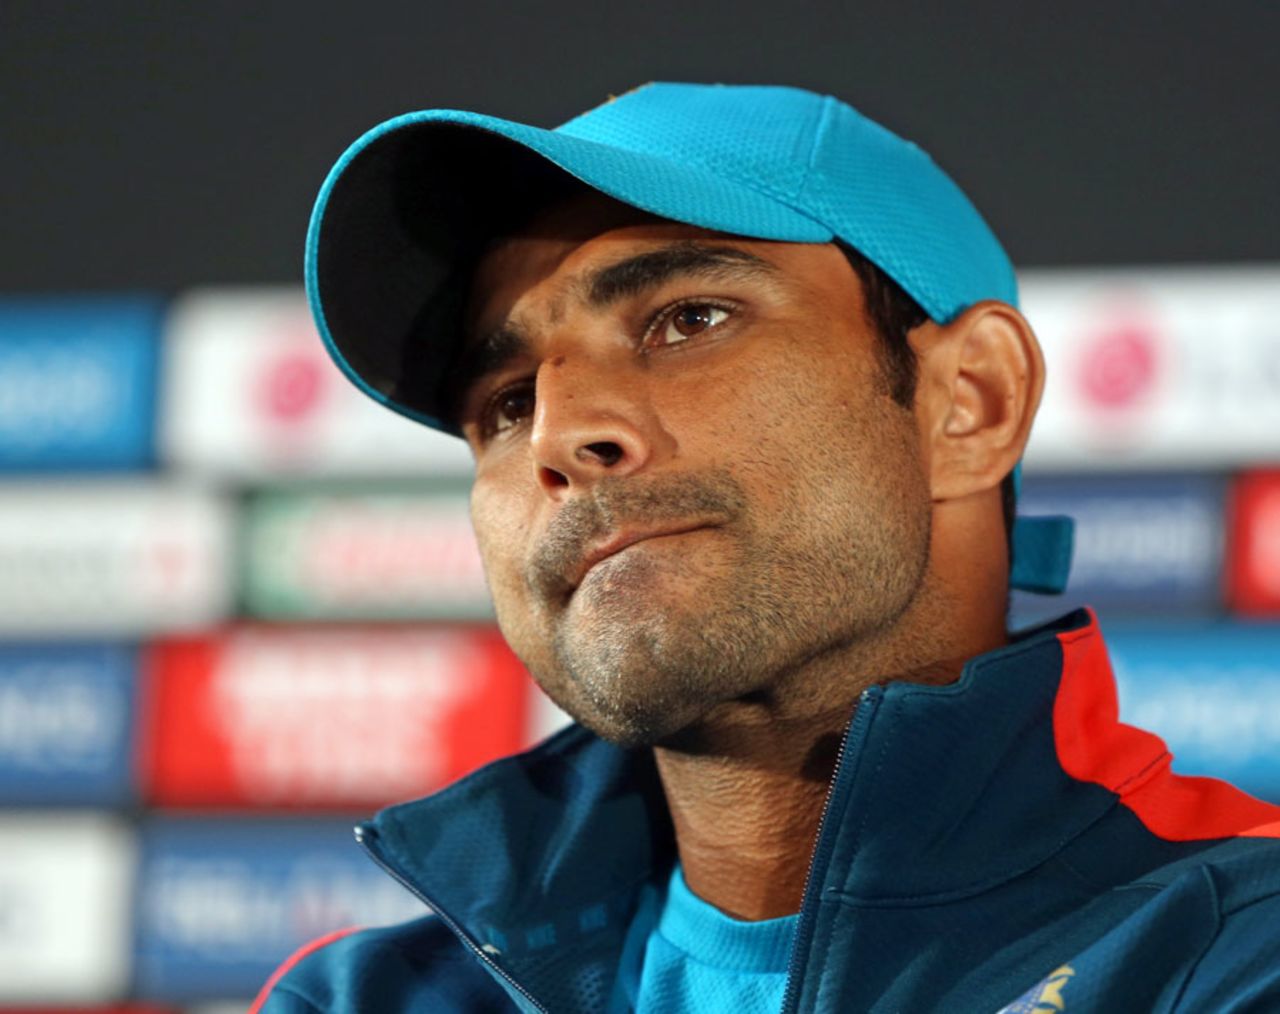 Mohammed Shami talks to the media on the eve of the game against Zimbabwe, World Cup 2015, Auckland, March 13, 2015